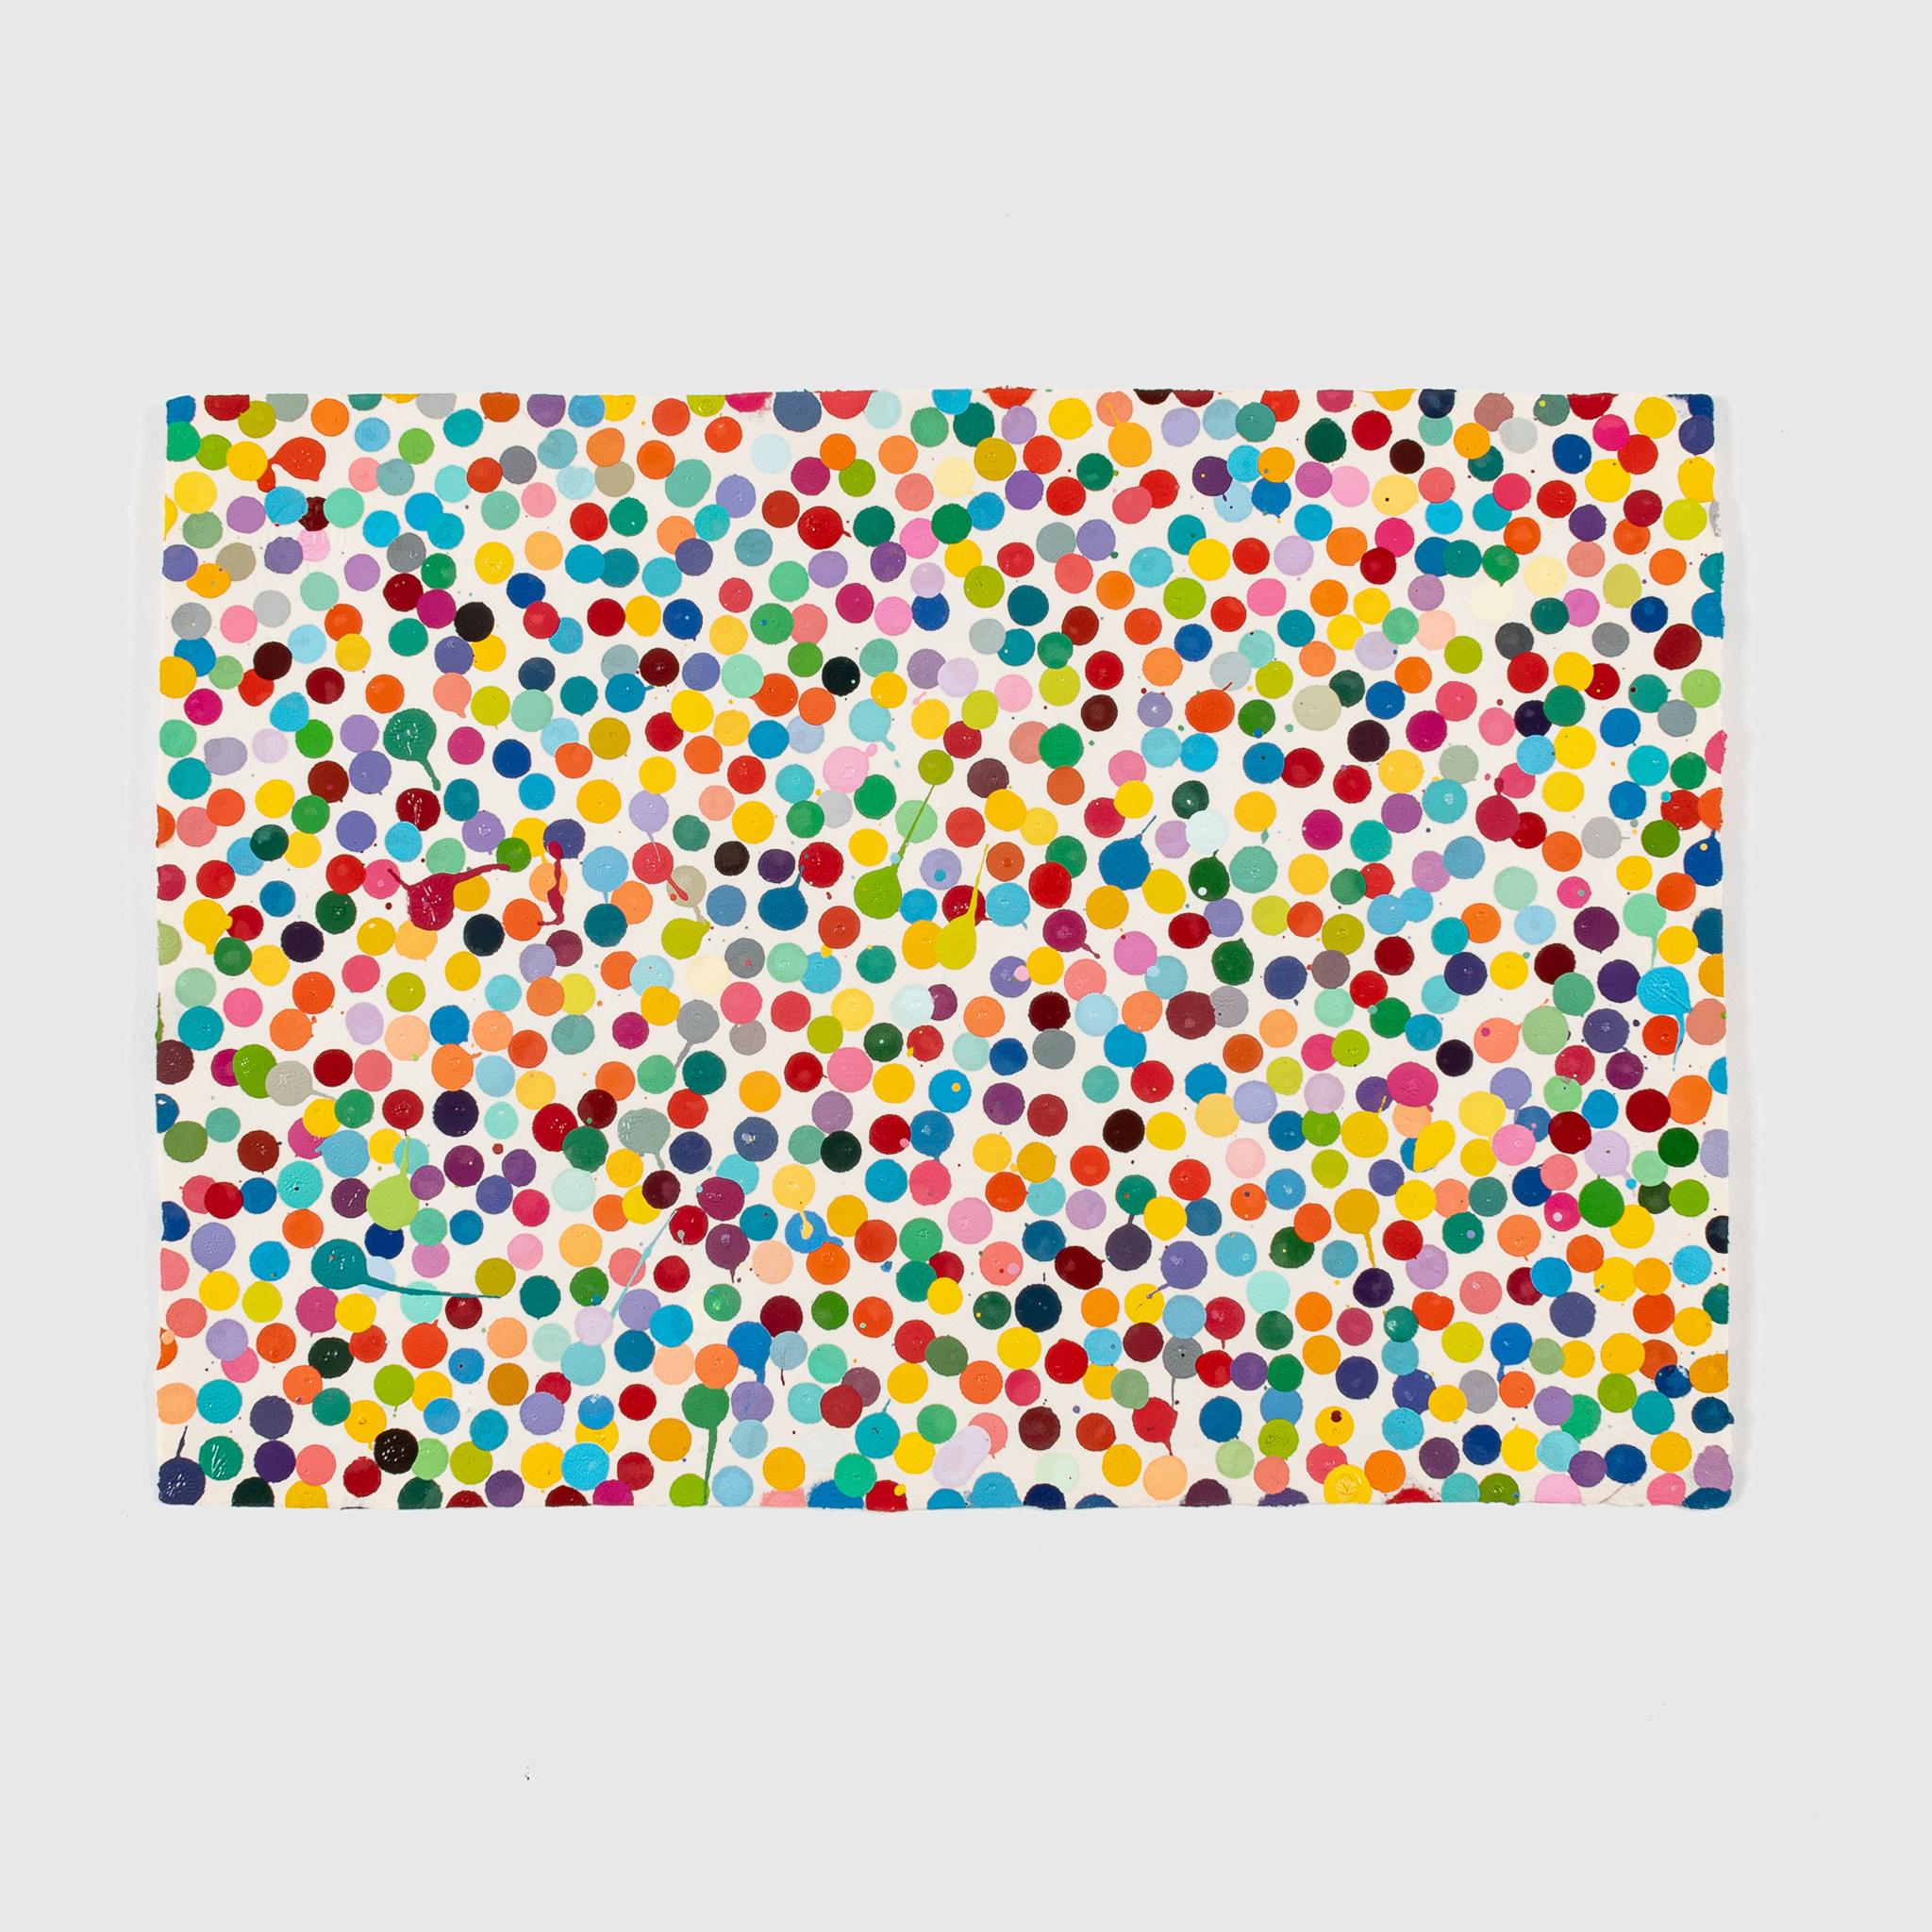 Damien Hirst Abstract Print - 6168. Don't change a thing (from The Currency), Limited Edition Signed Art